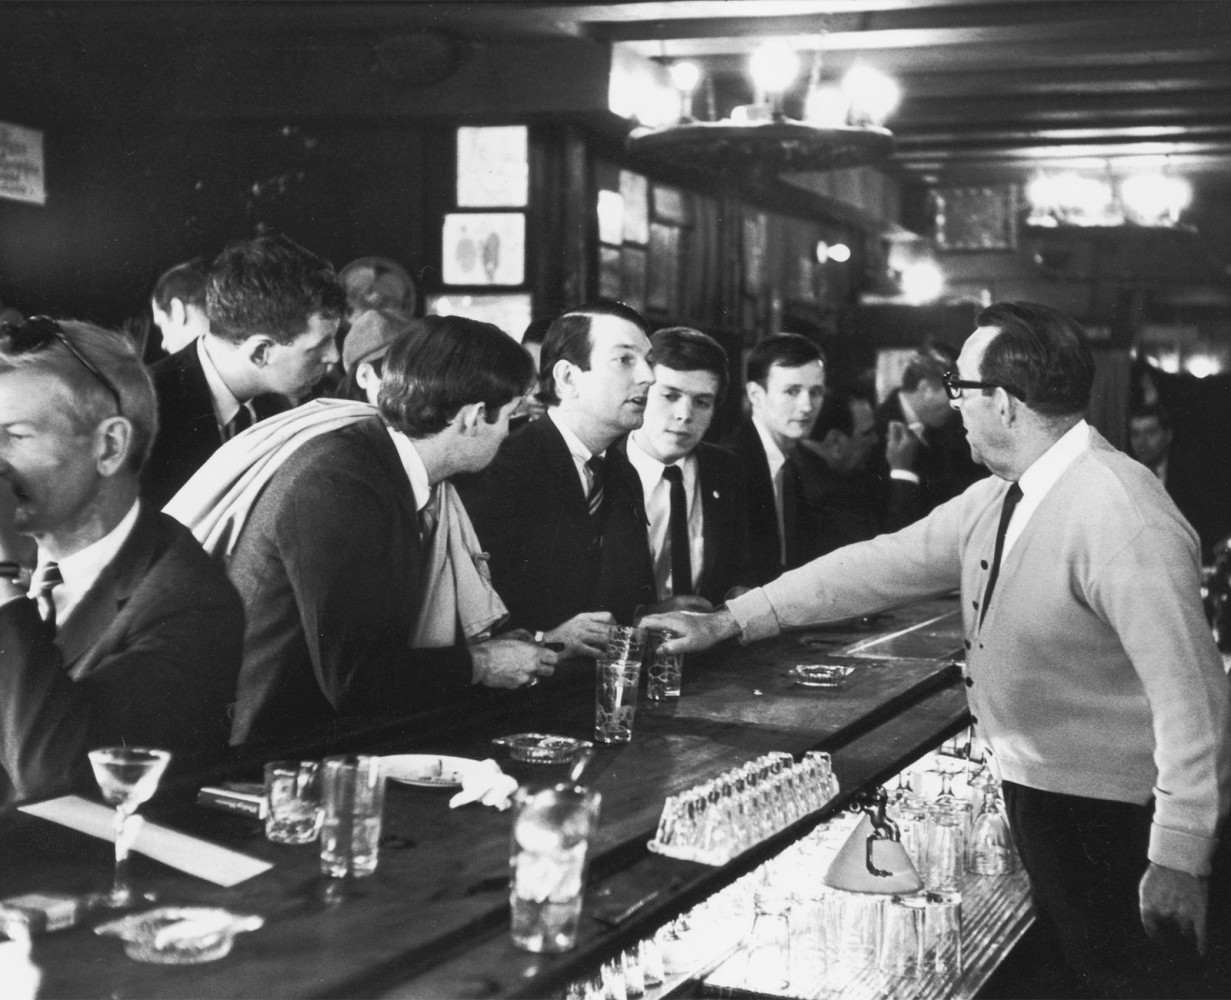 The original Sip-In at Julius bar in New York

April 21, 1966

Photo by&amp;nbsp;Fred W. McDarrah/Getty Images